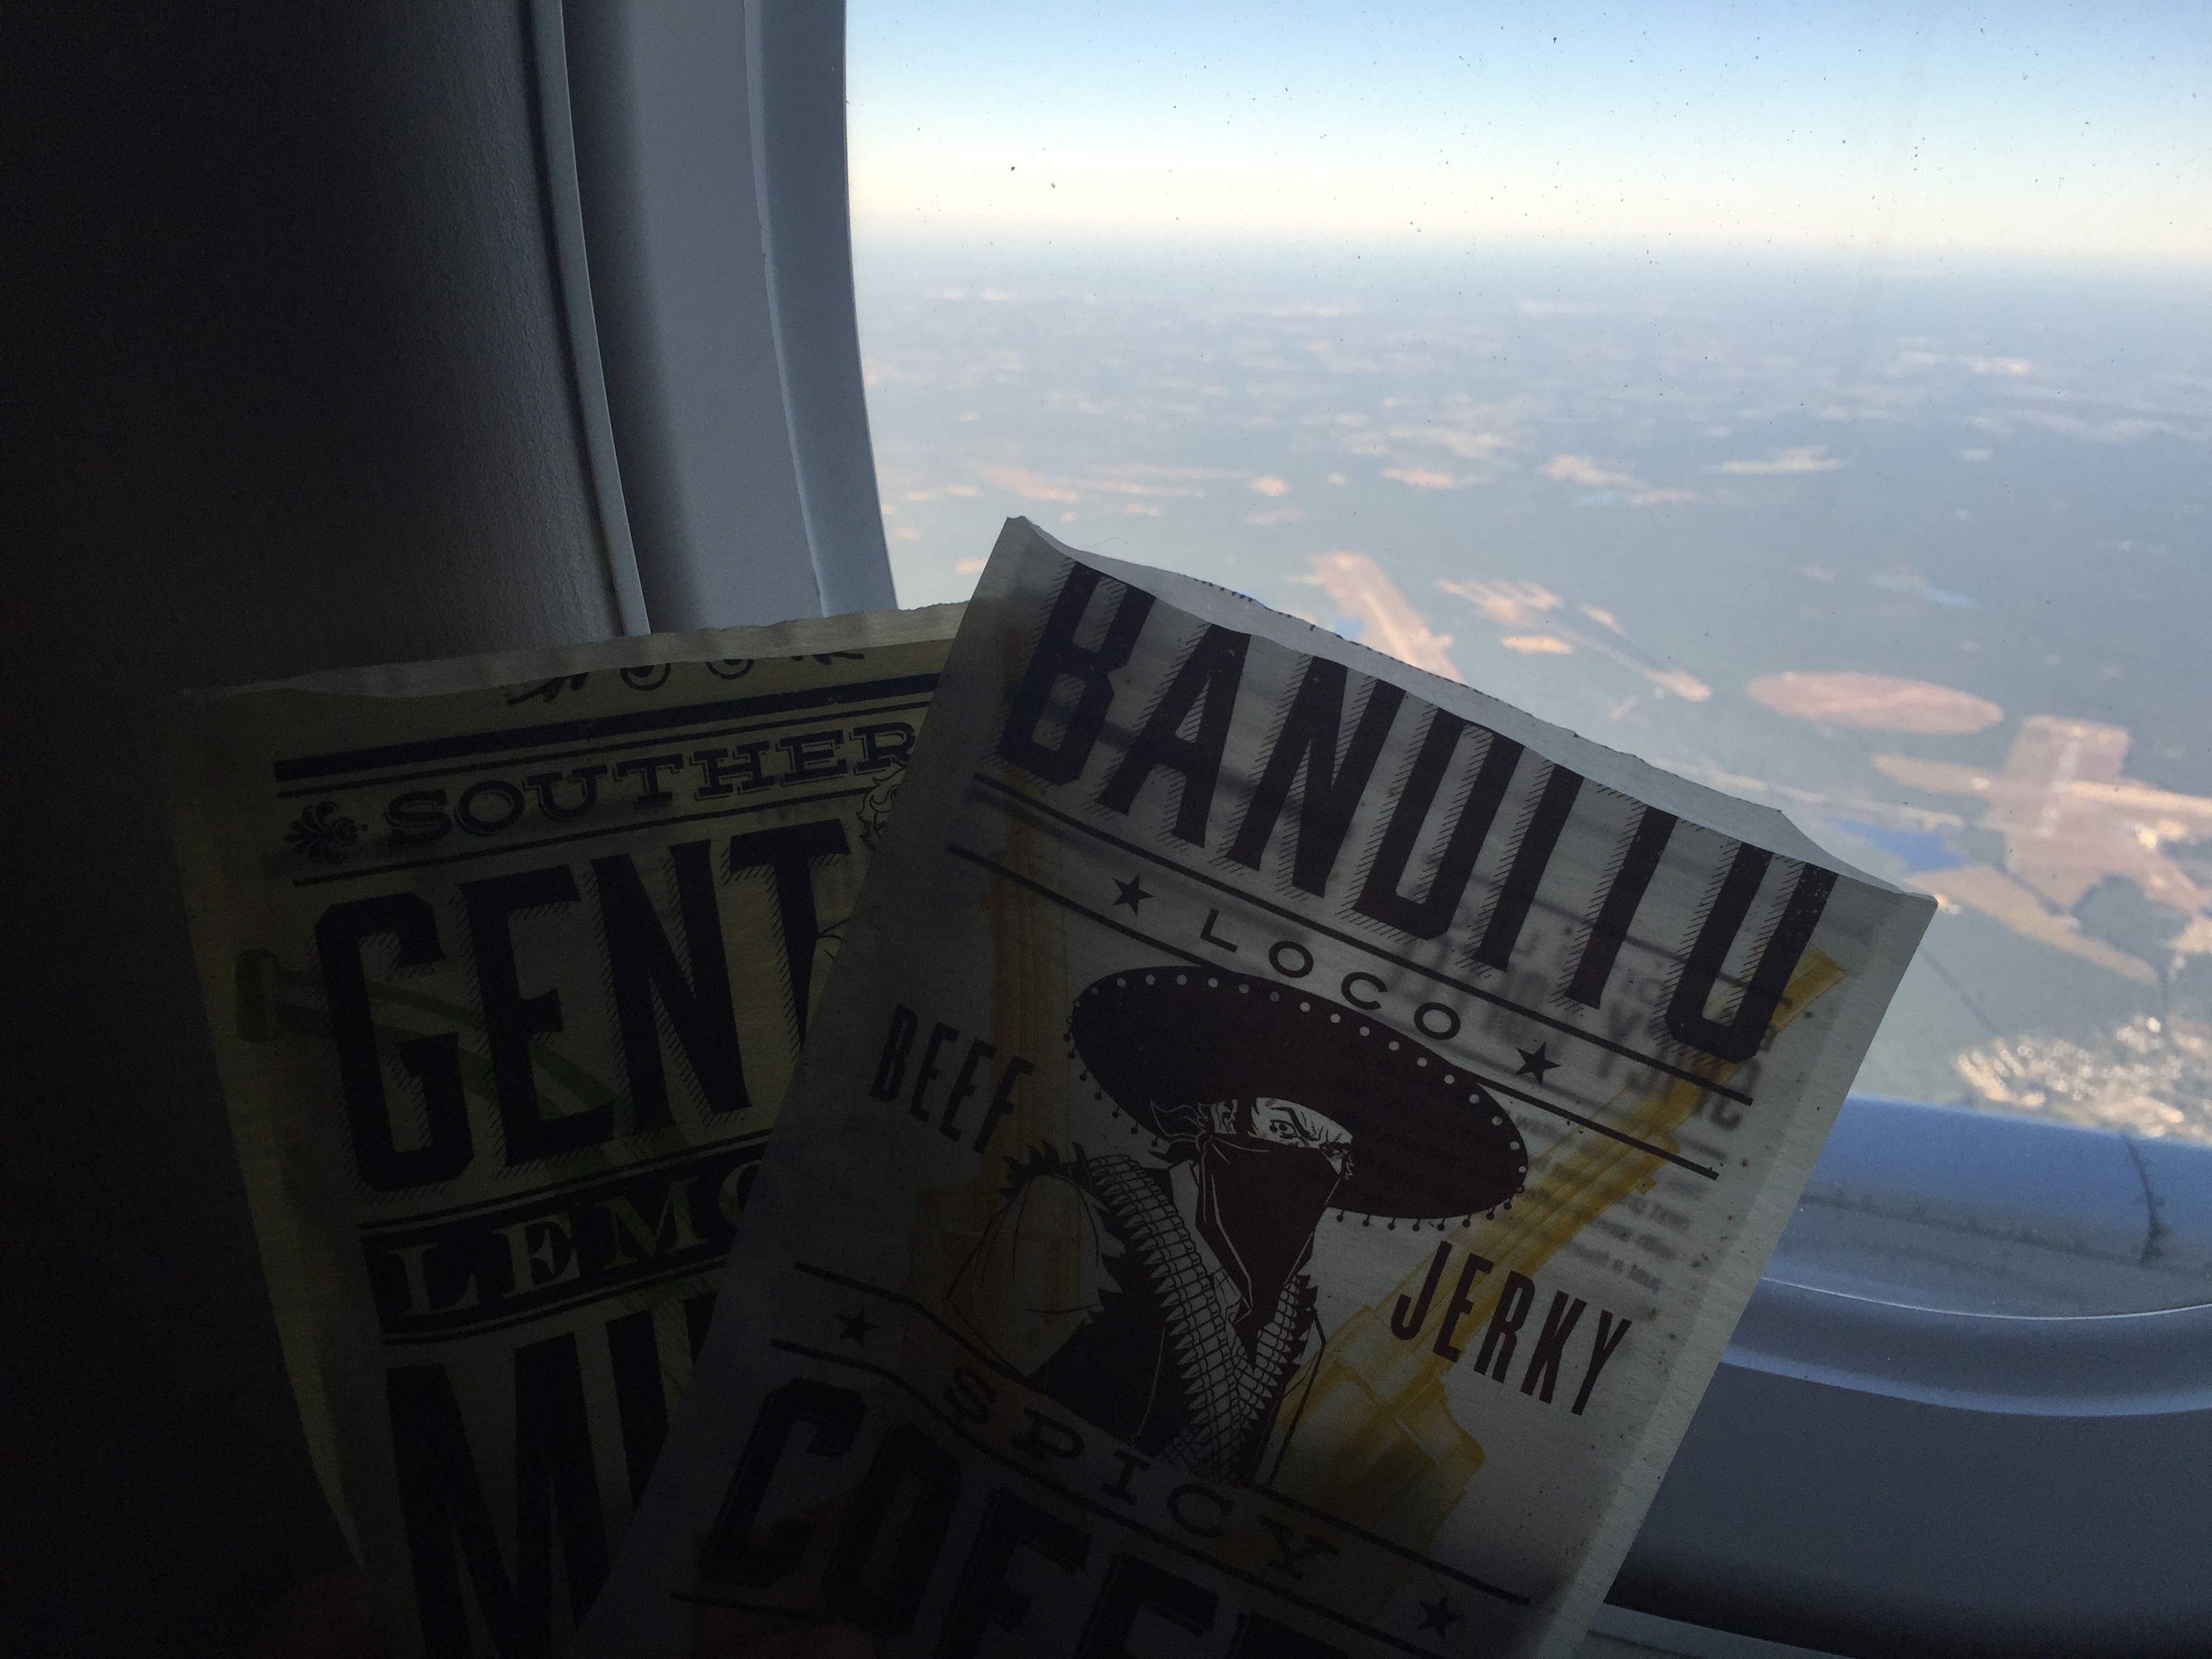 They allow jerky on airplanes, ya'll. Flying high somewhere over the midwest.